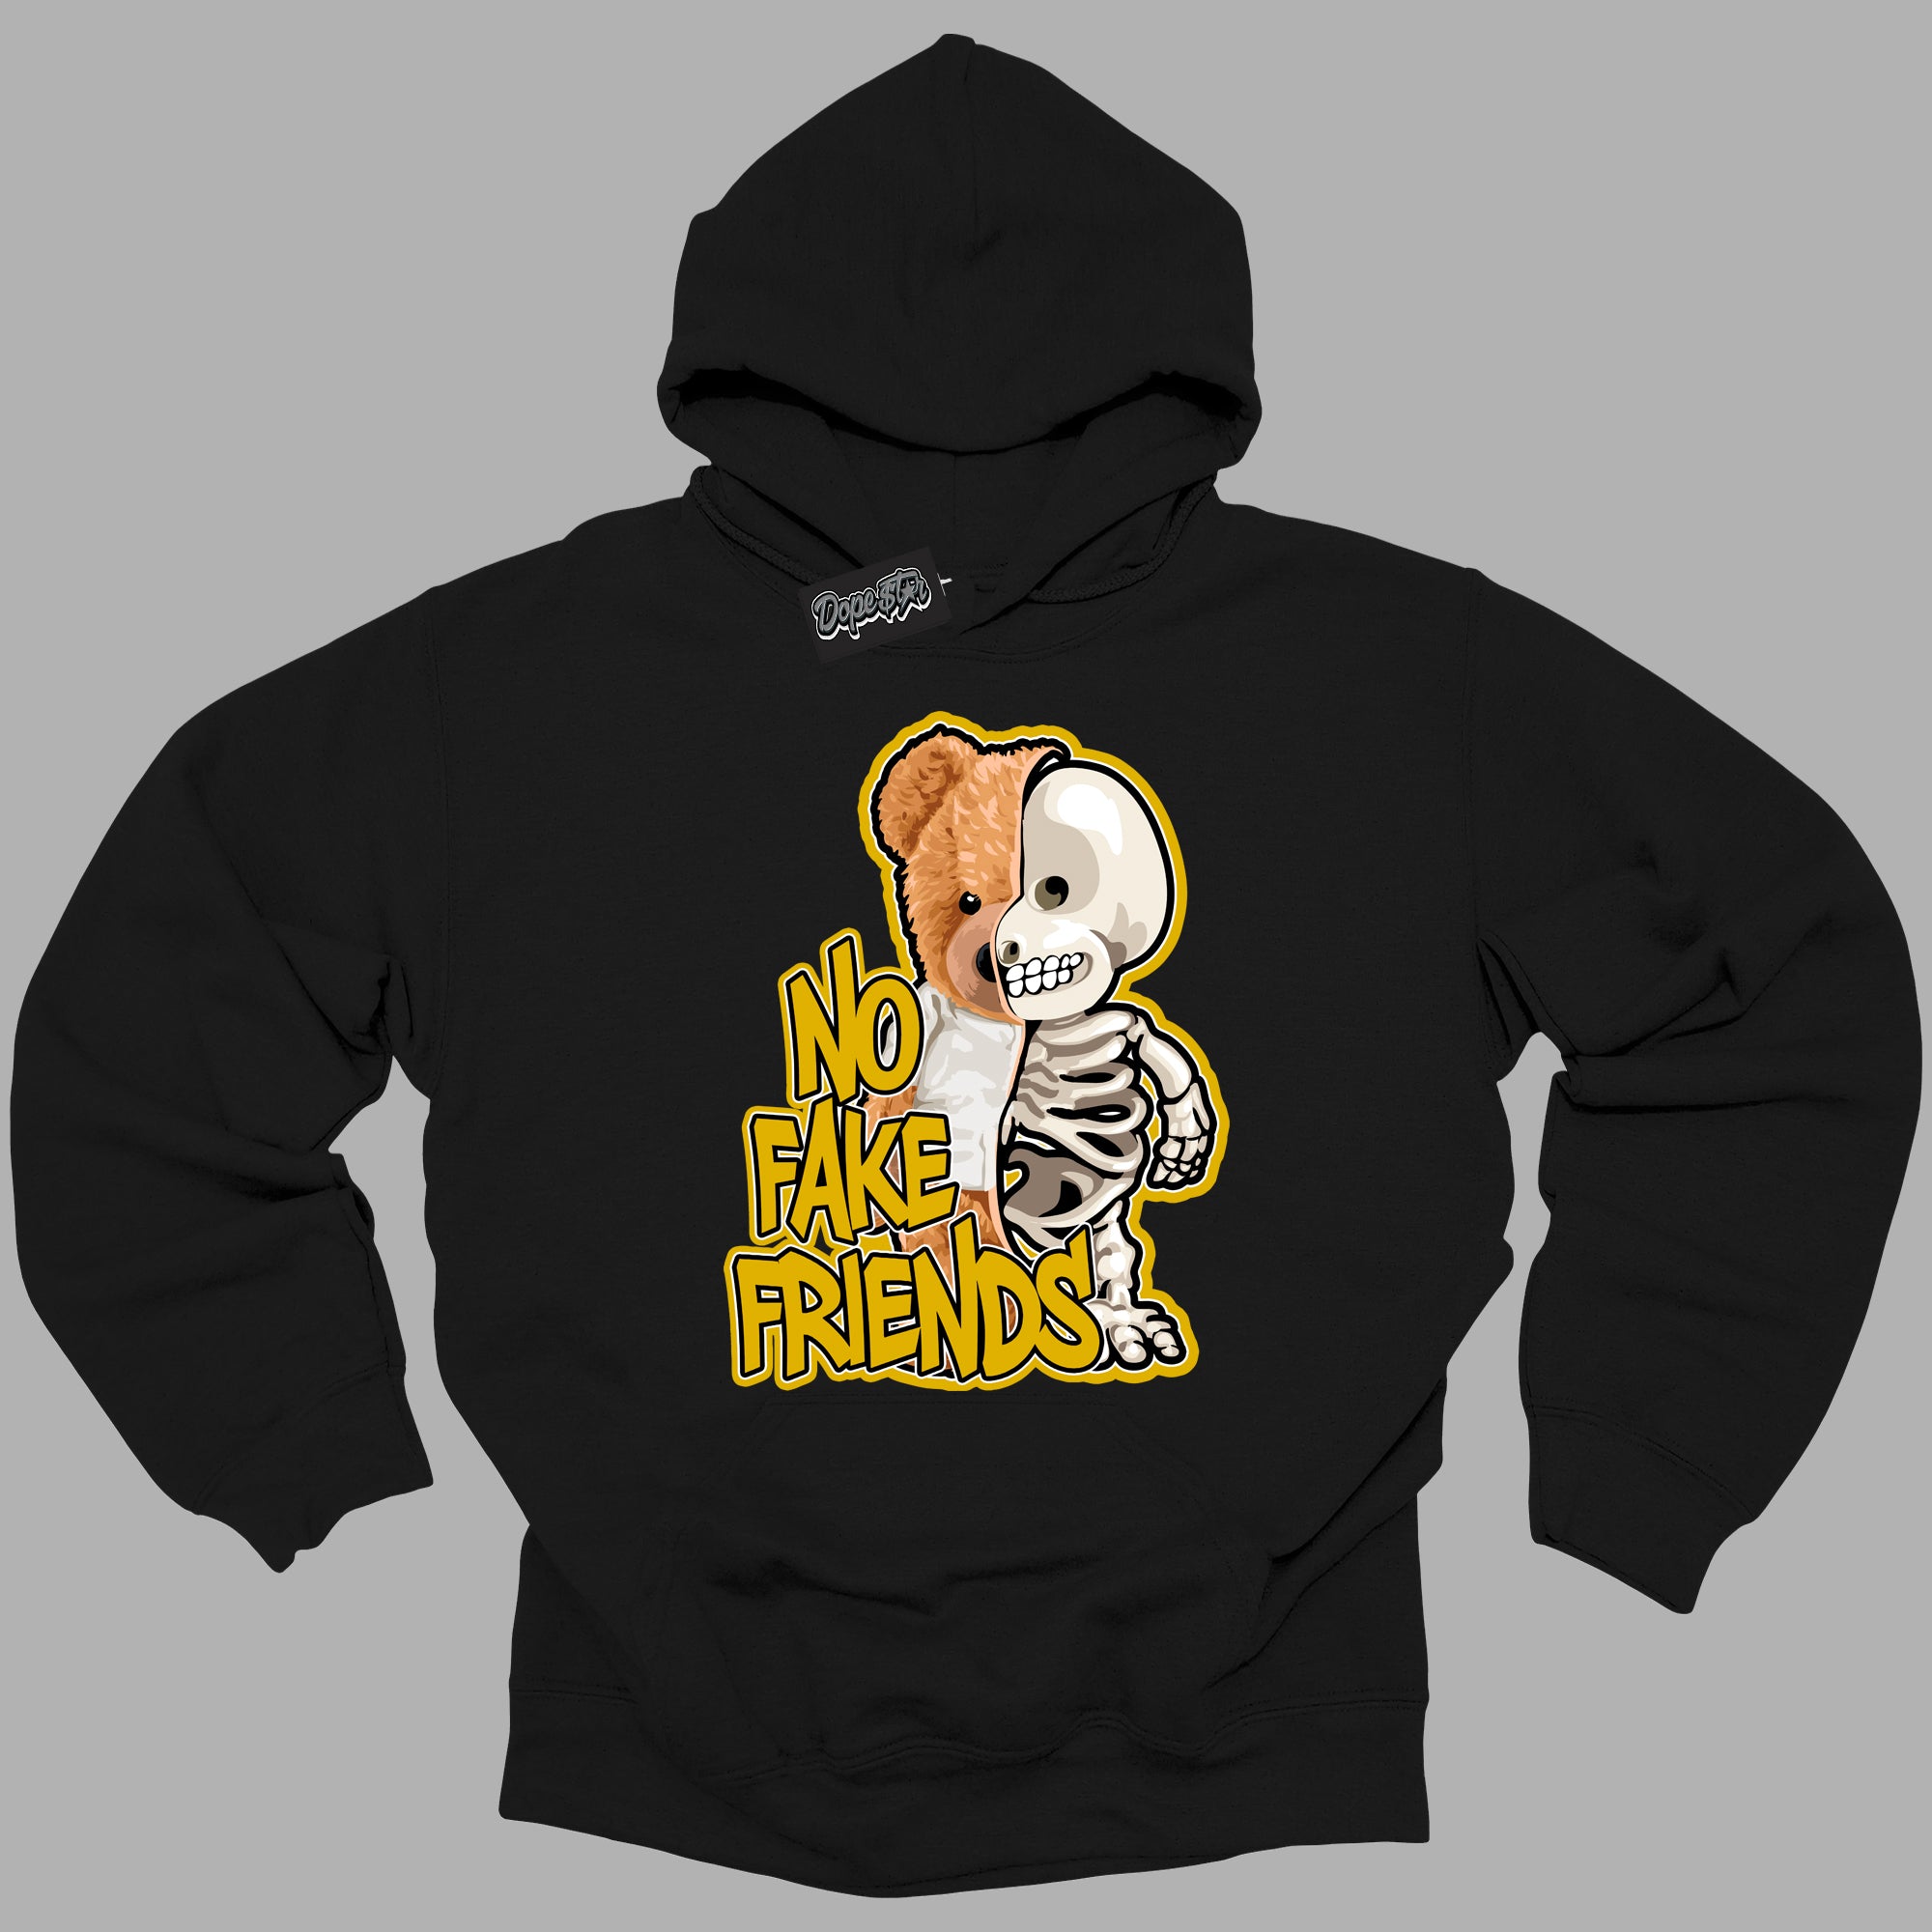 Cool Black Hoodie with “ No Fake Friends ”  design that Perfectly Matches Yellow Ochre 6s Sneakers.